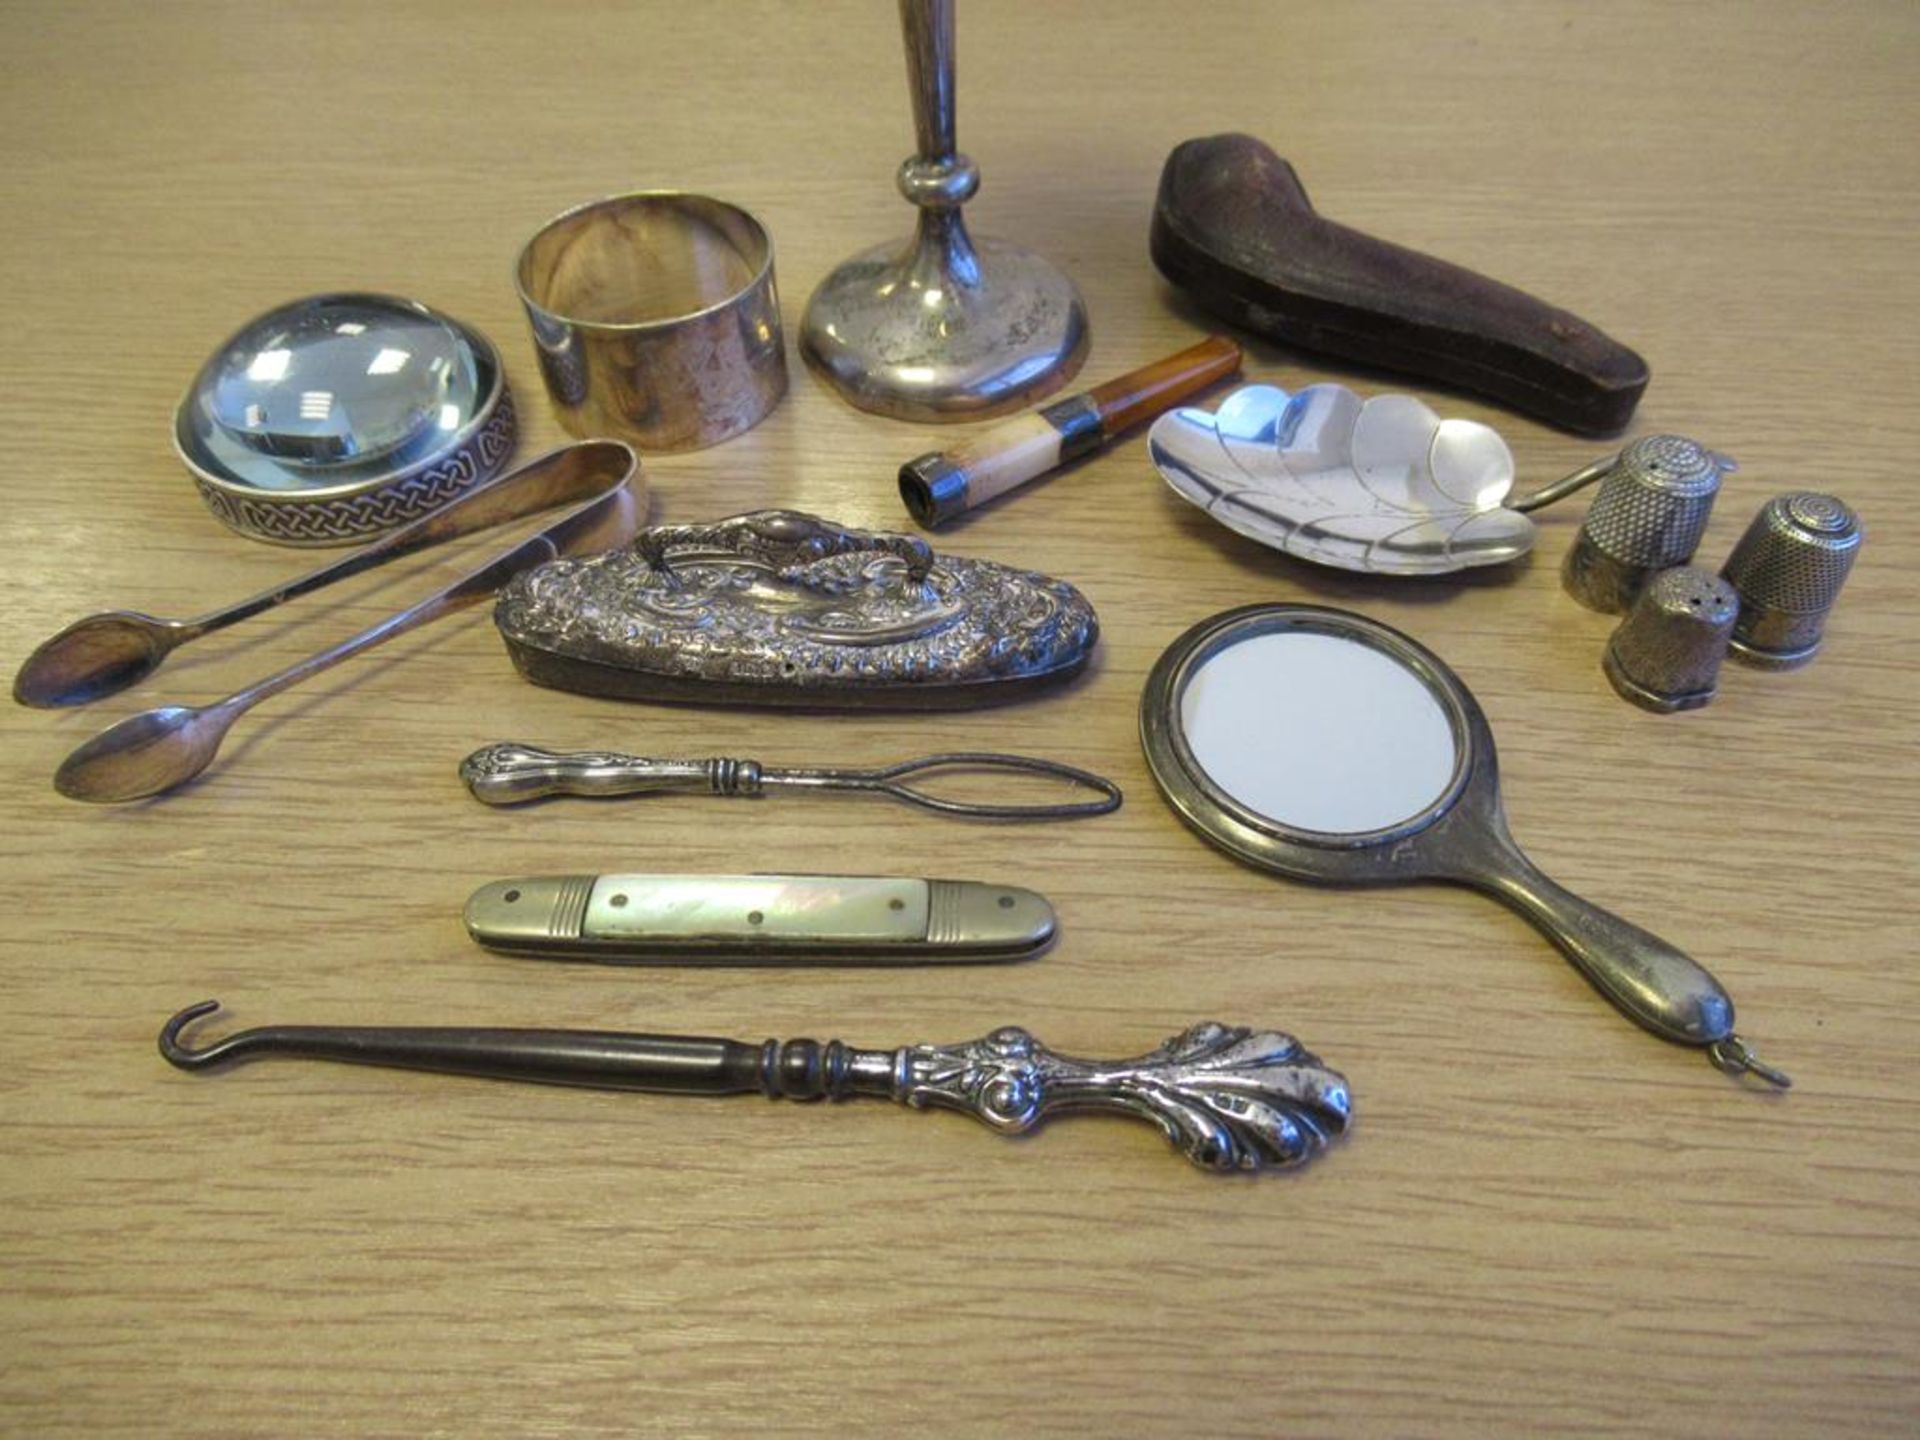 London Hallmarked Silver Vase Marked 925, Caddy Sppon, Silver Hallmarked Thimbles, Dressing Table Pi - Image 2 of 2